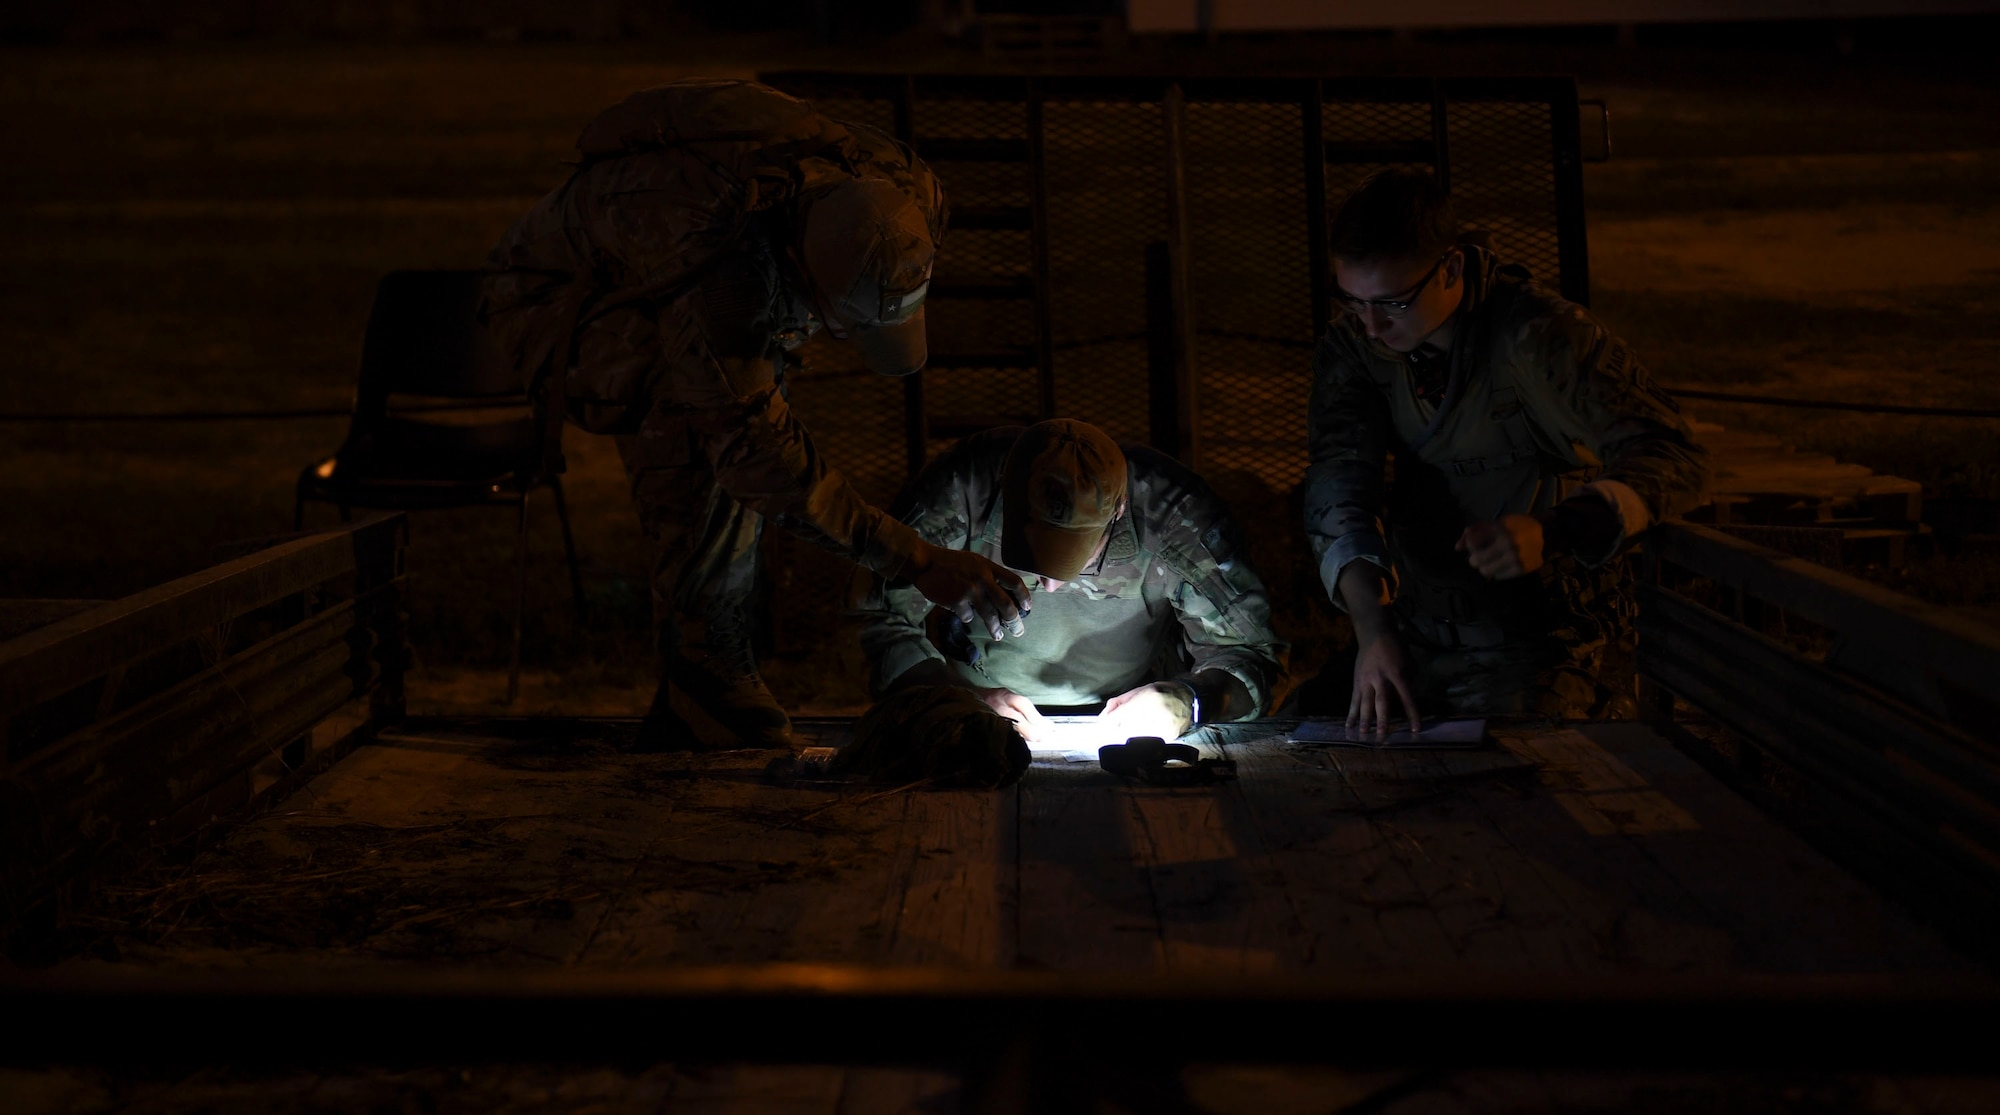 Competitors from the 20th Air Support Operations Squadron plan their route during the night land navigation event of Dragon Challenge 2018 at Fort Bragg, North Carolina Oct. 31, 2018. The event required competitors to navigate through the woods in the dark to as many points as possible within the allotted time. (U.S. Air Force photo by 1st Lt. Faith Brodkorb)